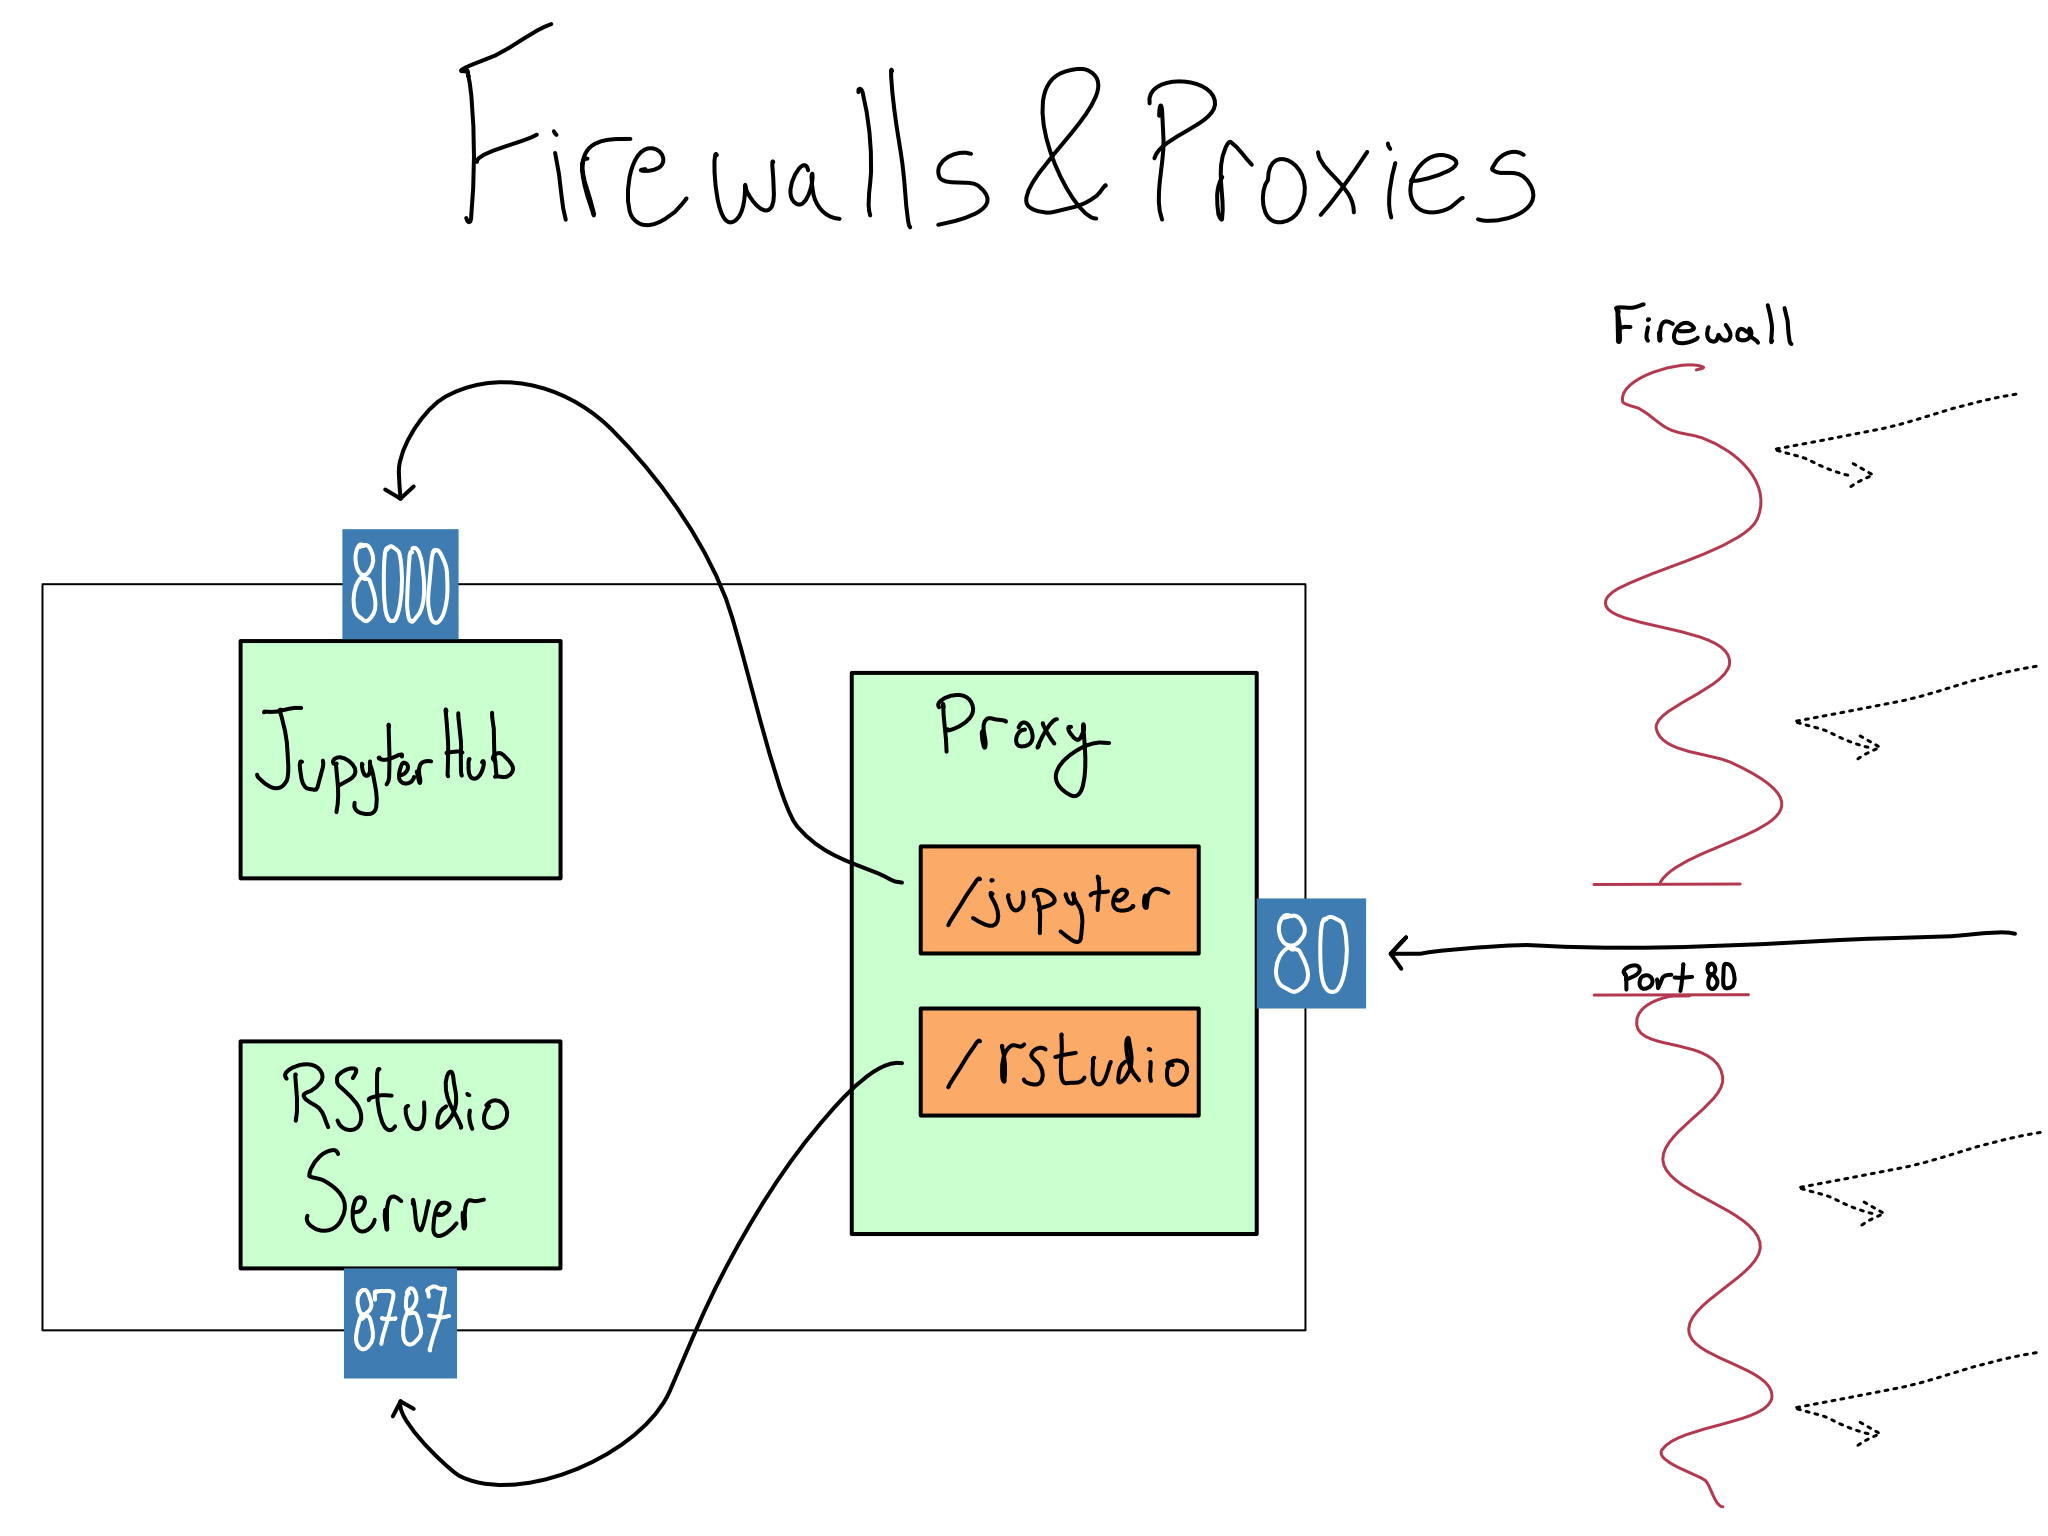 Traffic coming through firewall only on port 80. Proxy routes /jupyter to port 8000 on server and /rstudio to port 8787.